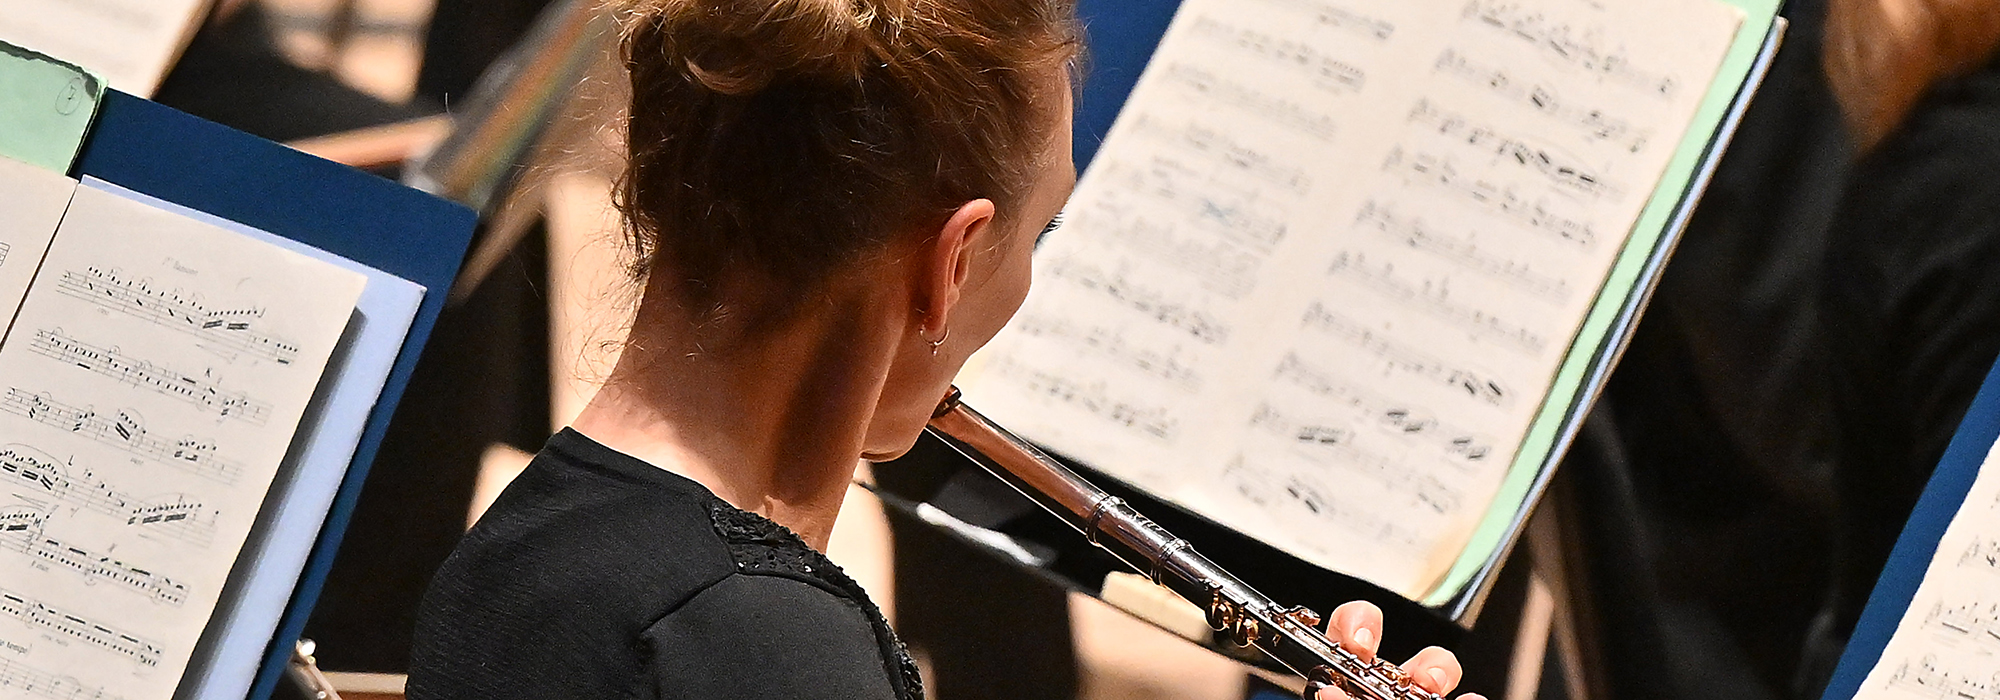 The Royal Philharmonic Orchestra performing at the Southbank Centre in London. Image shows a female flutist performing in front of open sheet music Credit: Mark Allan